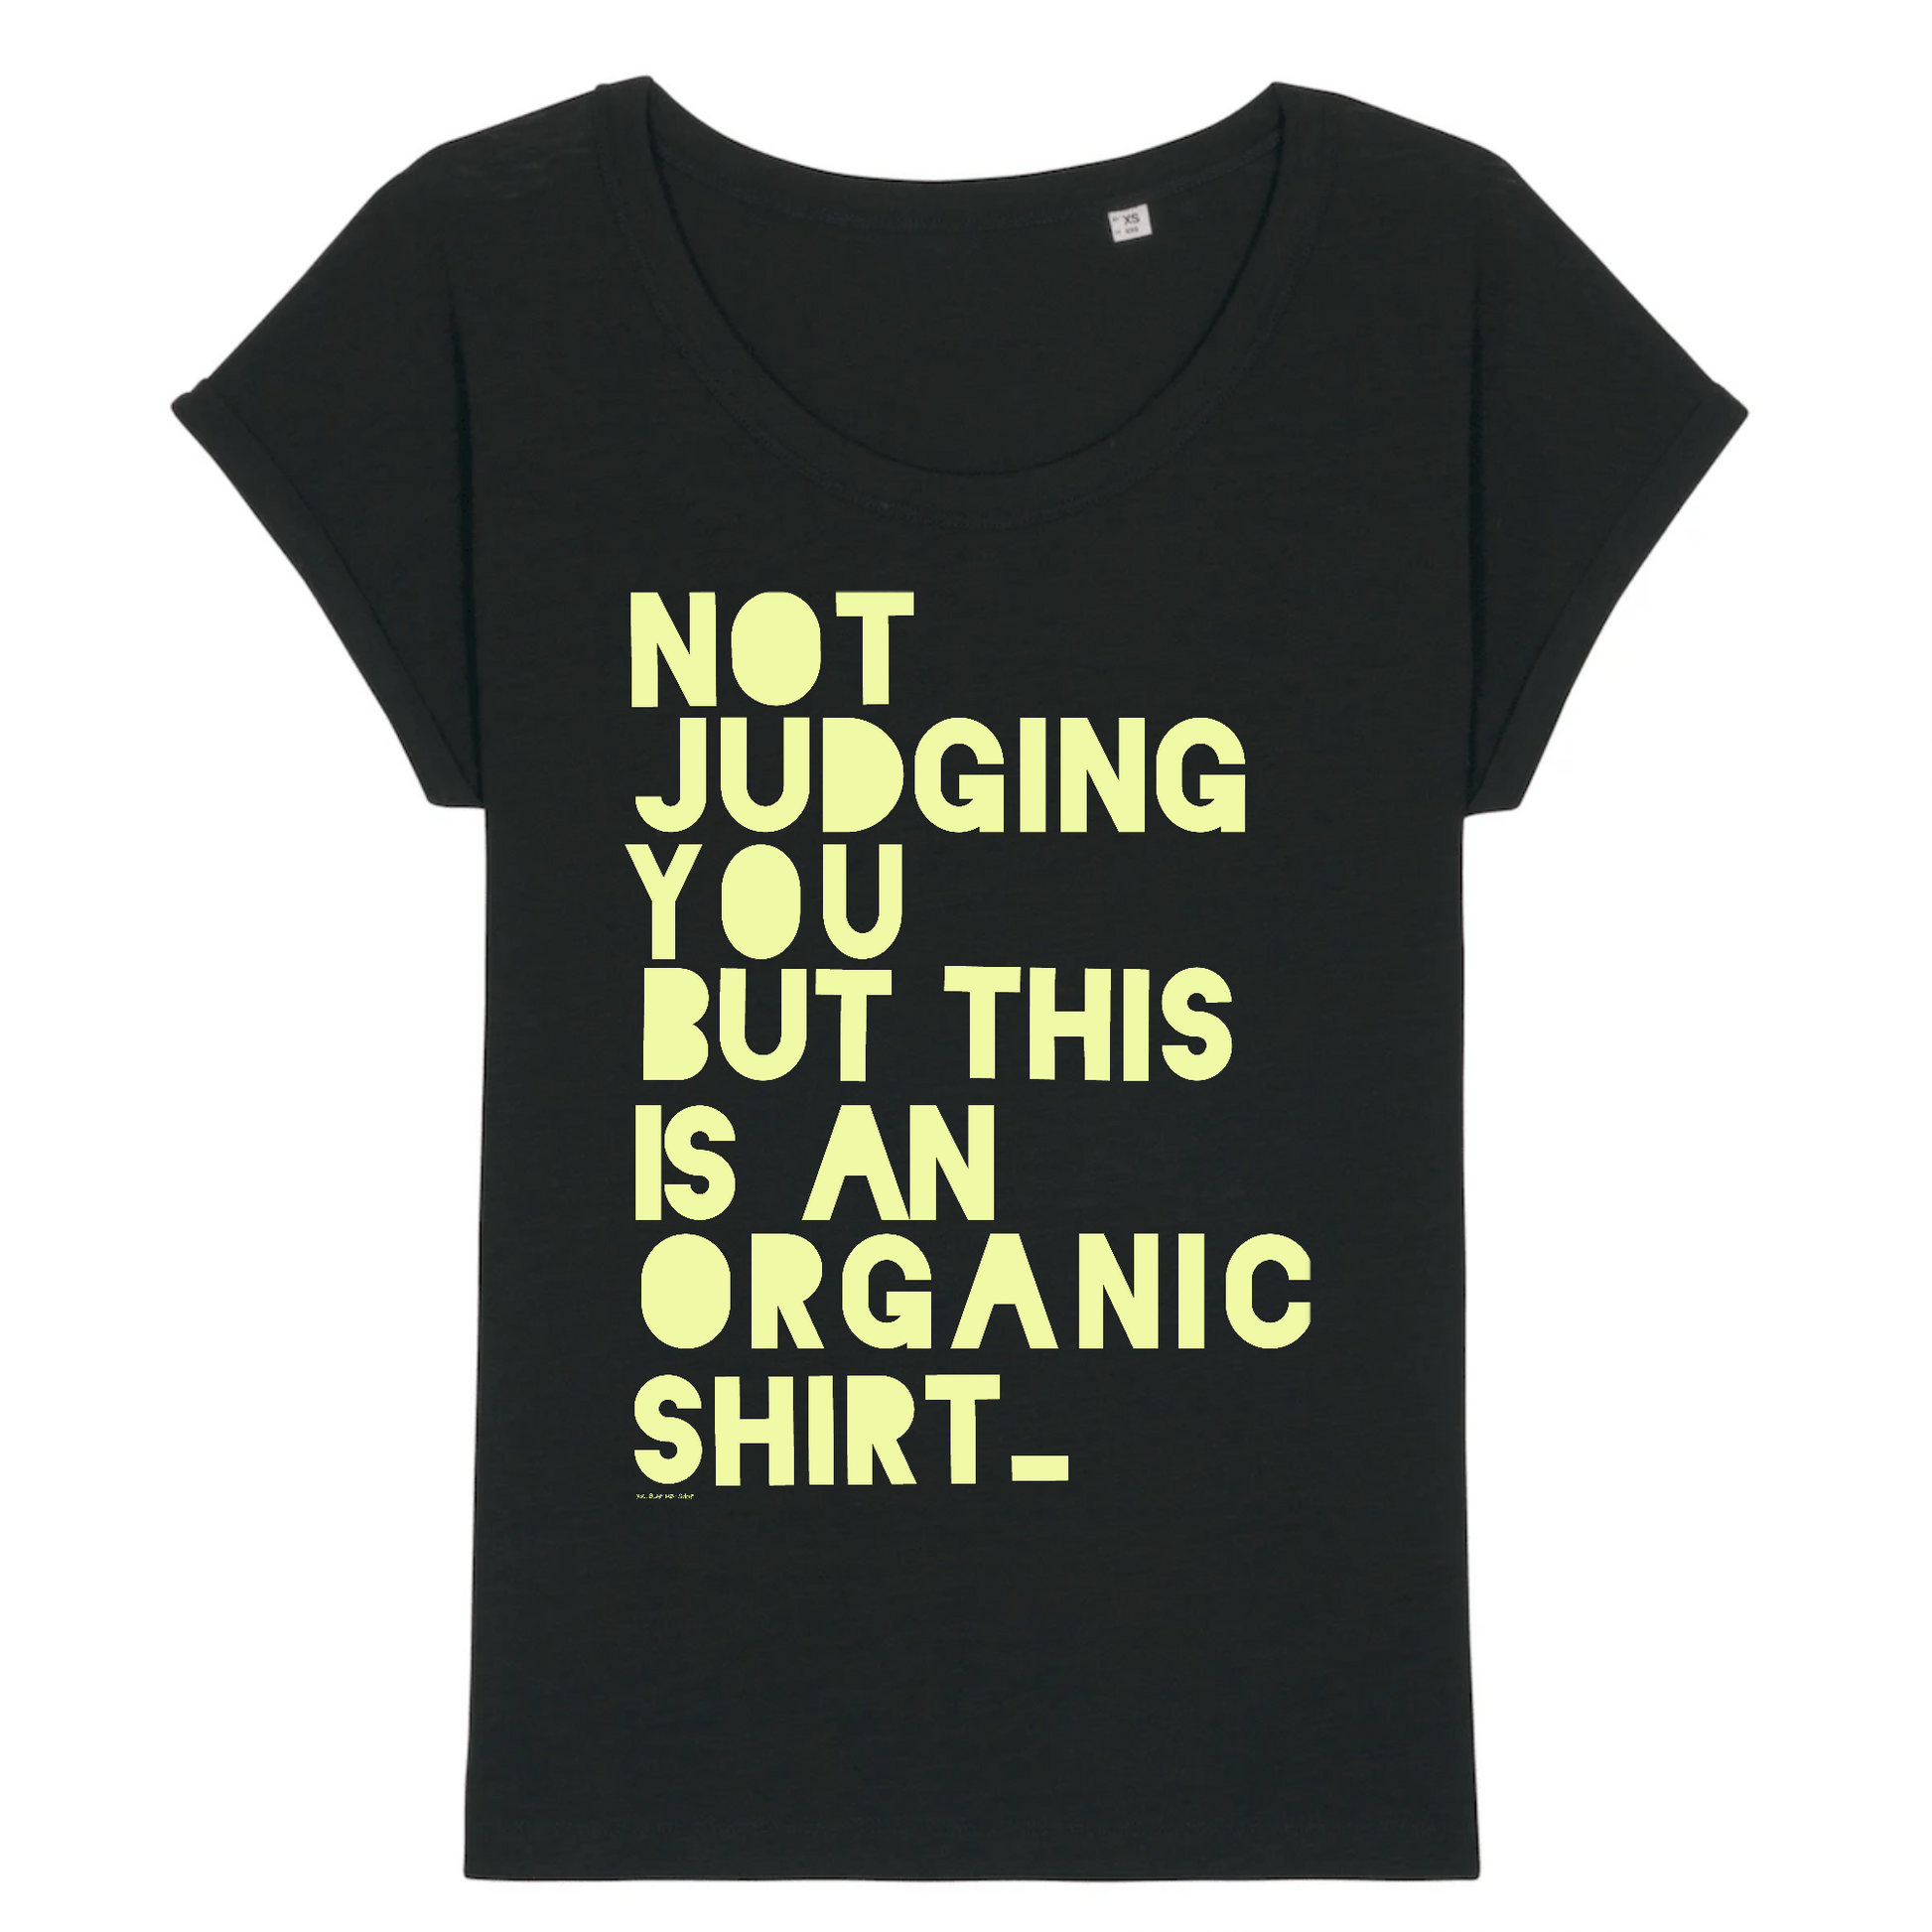 Organic black roll up sleeve women style comfy slub shirt tee with Not judging you but this is an organic shirt graphic print. For lovers the planet and of sustainability, that likes funny provoking statement shirts. Printed with Eco sustainable ink.